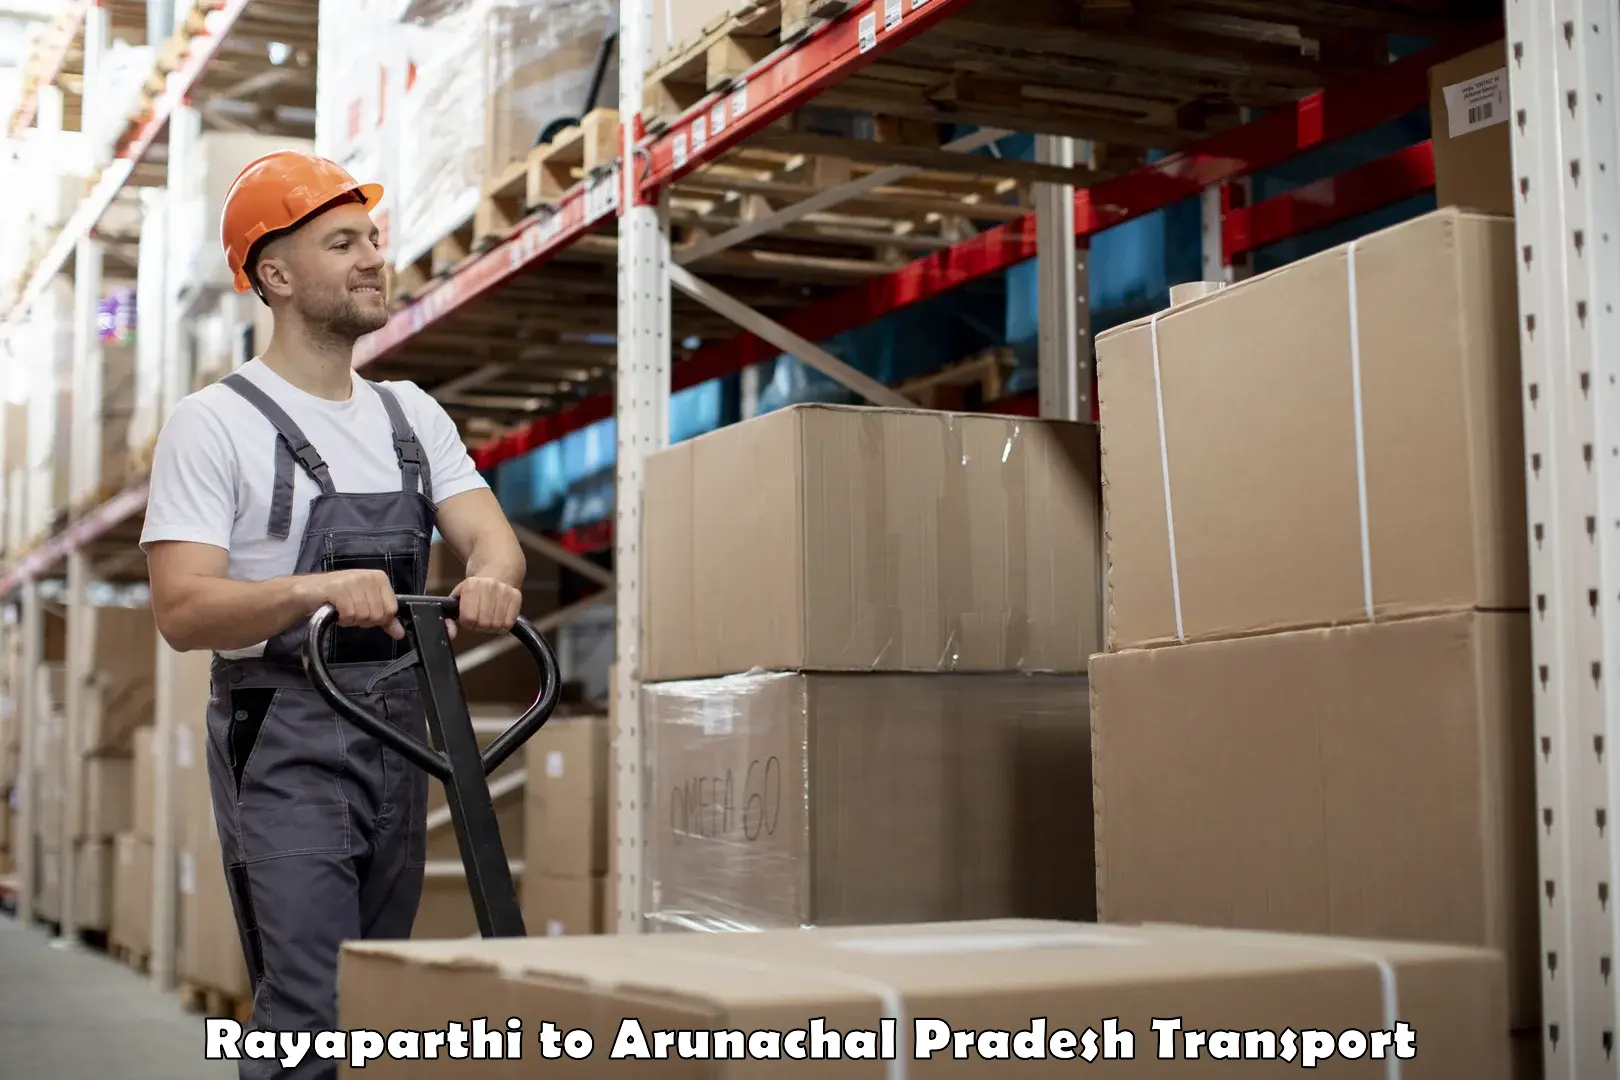 Container transportation services Rayaparthi to Lohit